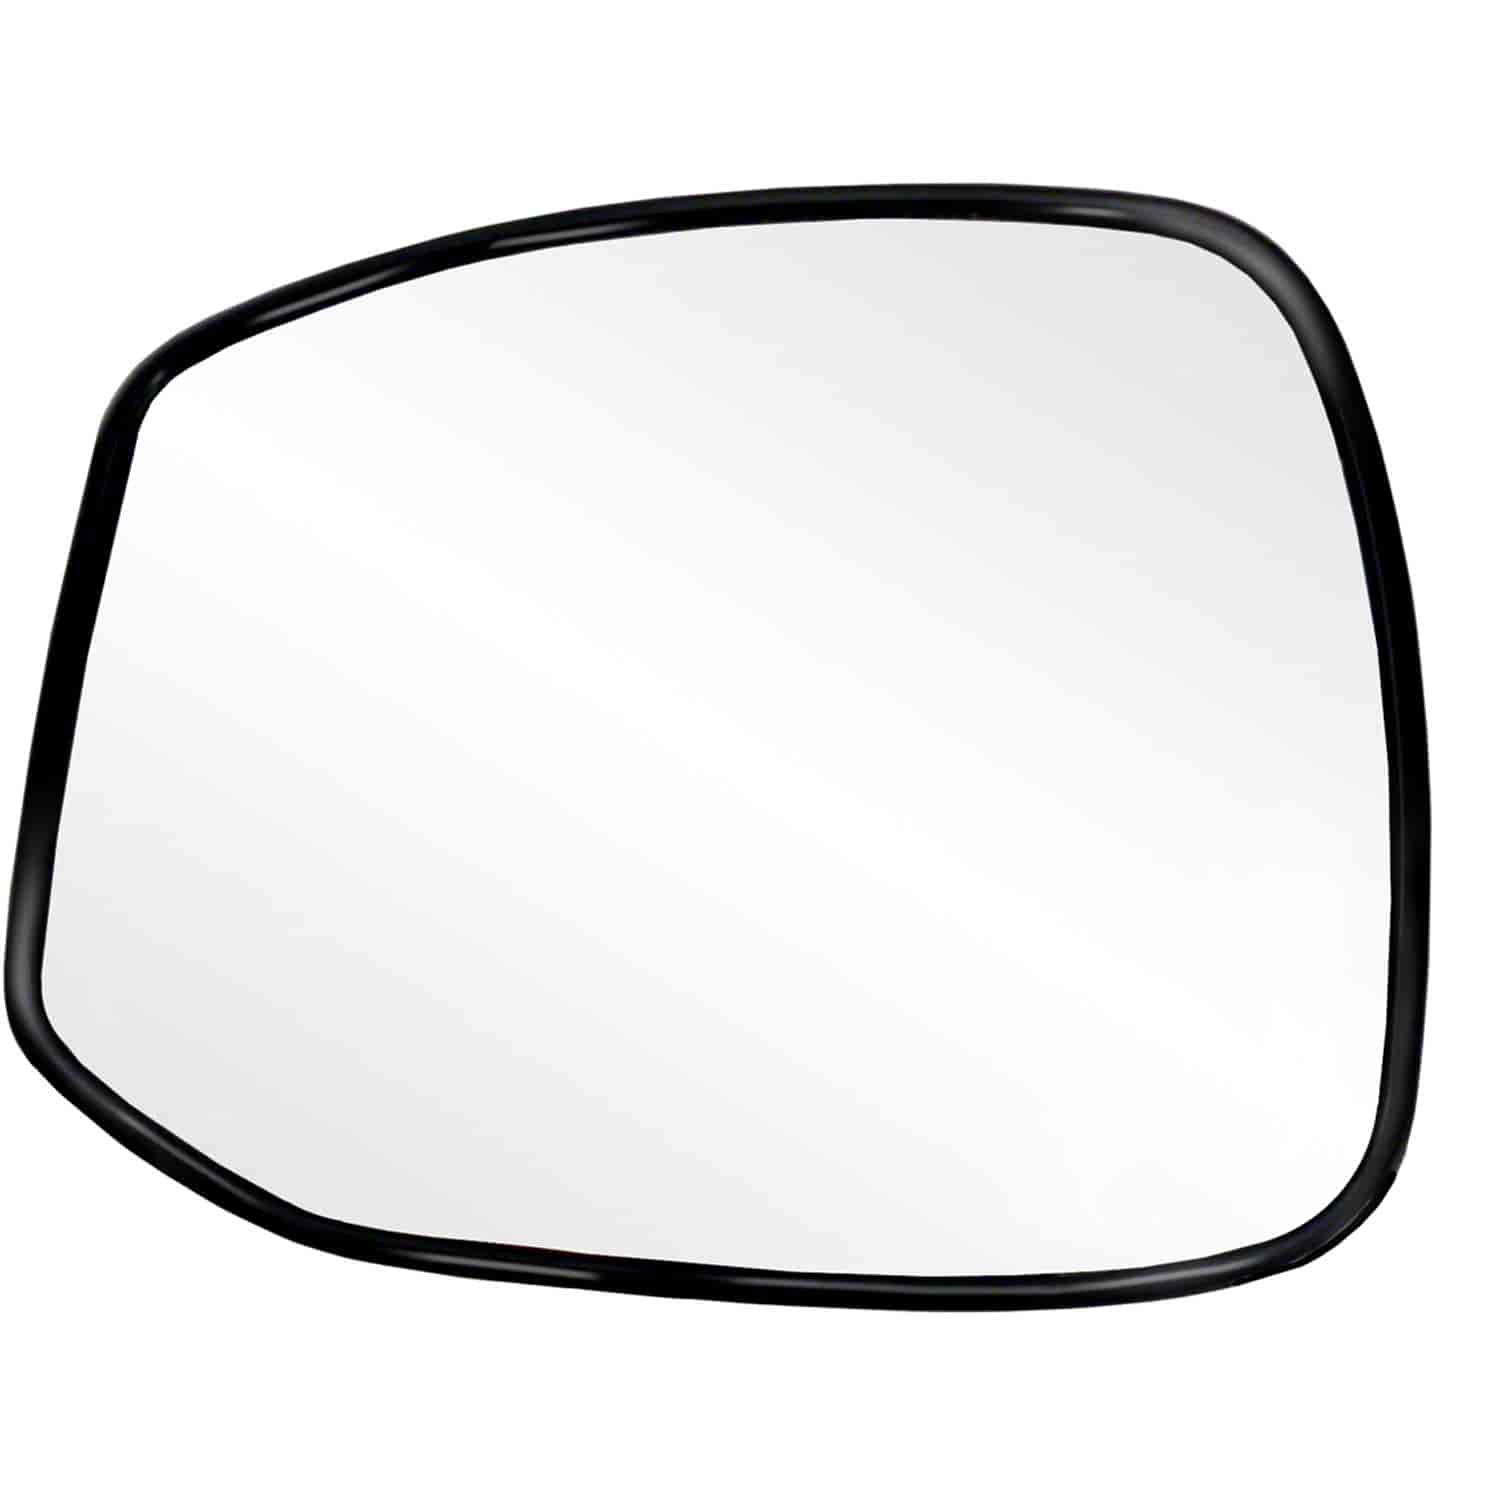 Replacement Glass Assembly for 12-14 Civic replace your cracked or broken driver side mirror glass a